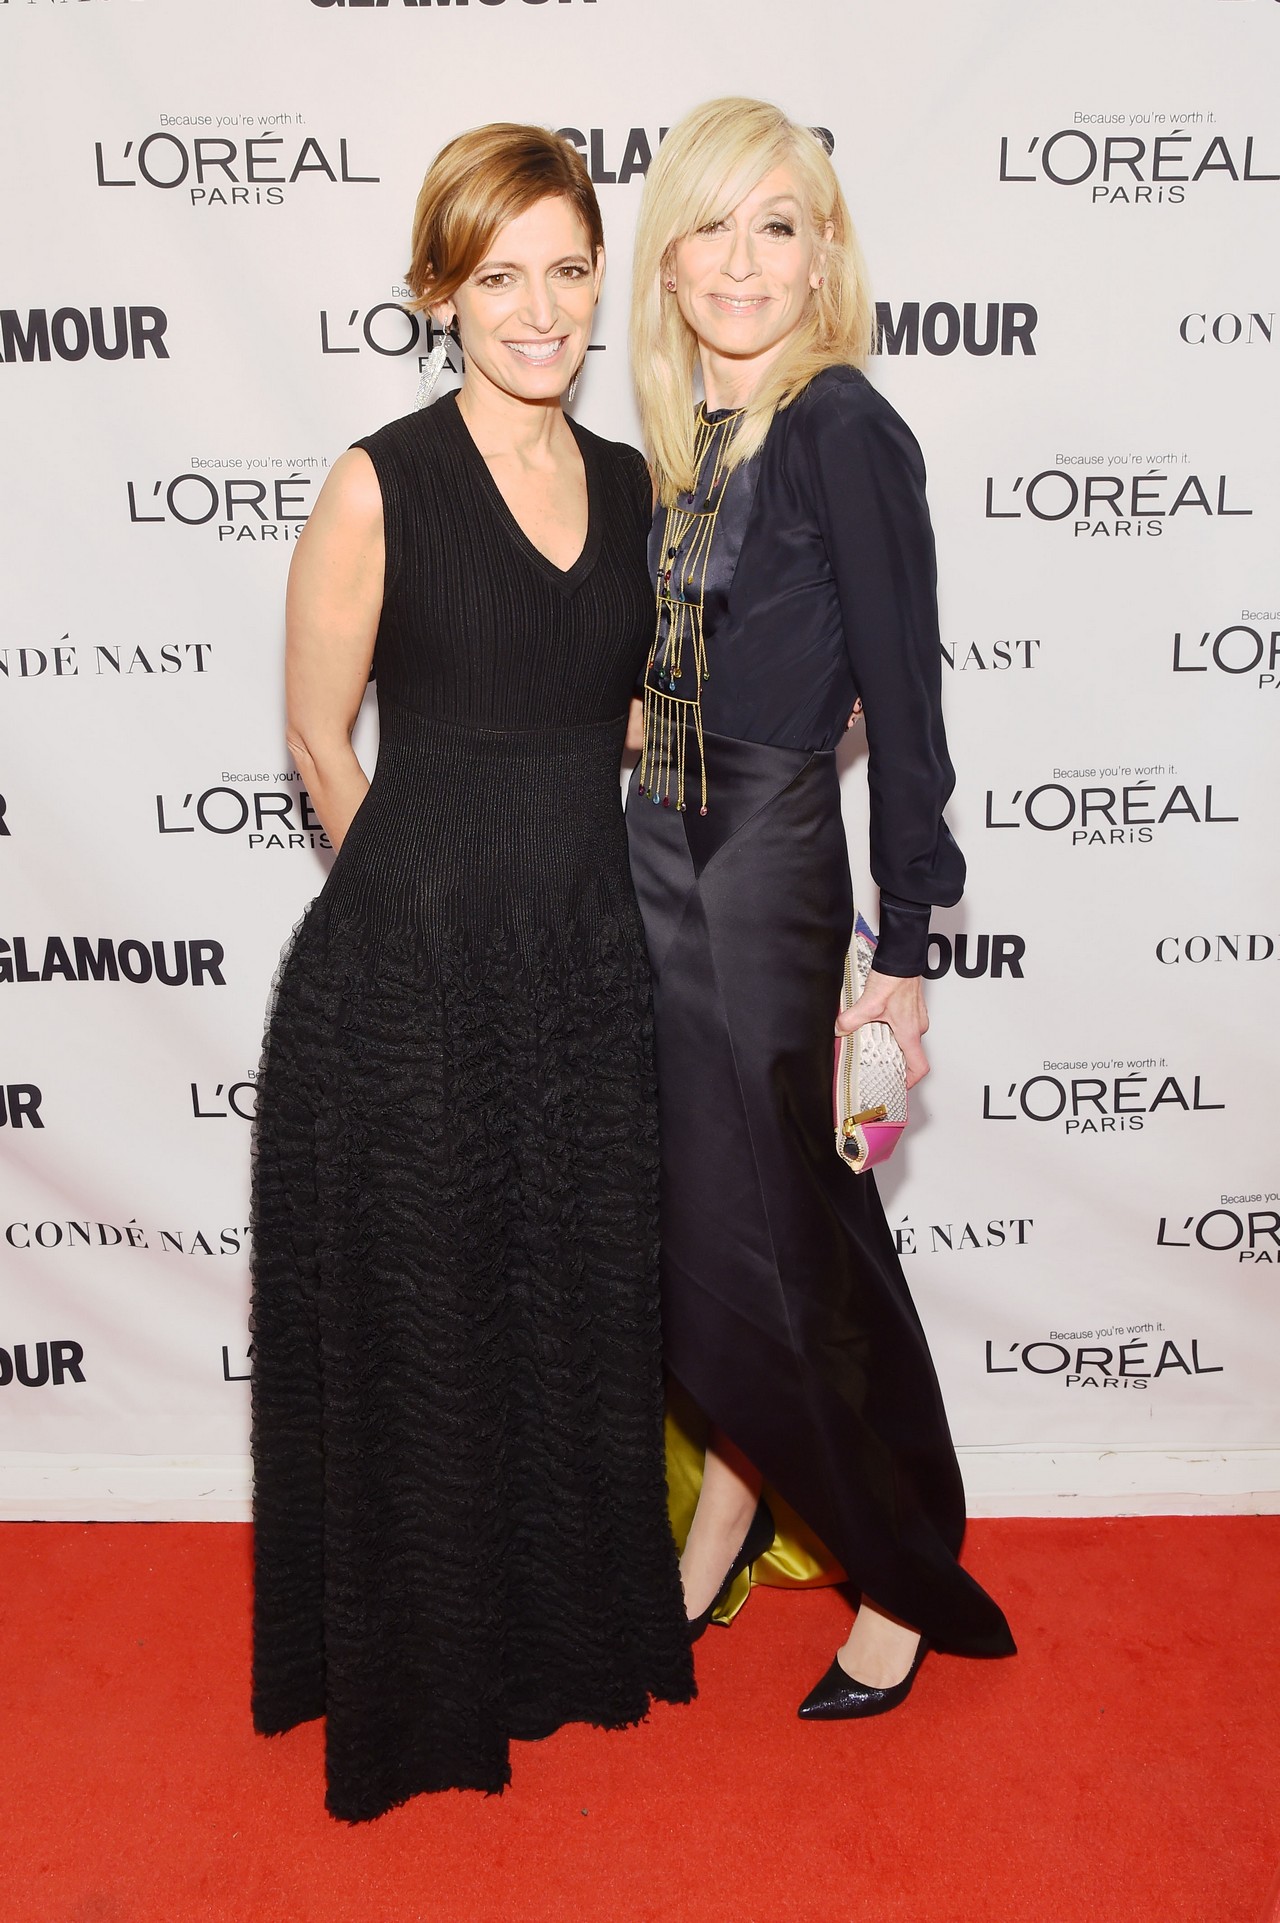 Glamour Women of the Year Awards 2015: premiate Victoria Beckham, Caitlyn Jenner e Reese Witherspoon